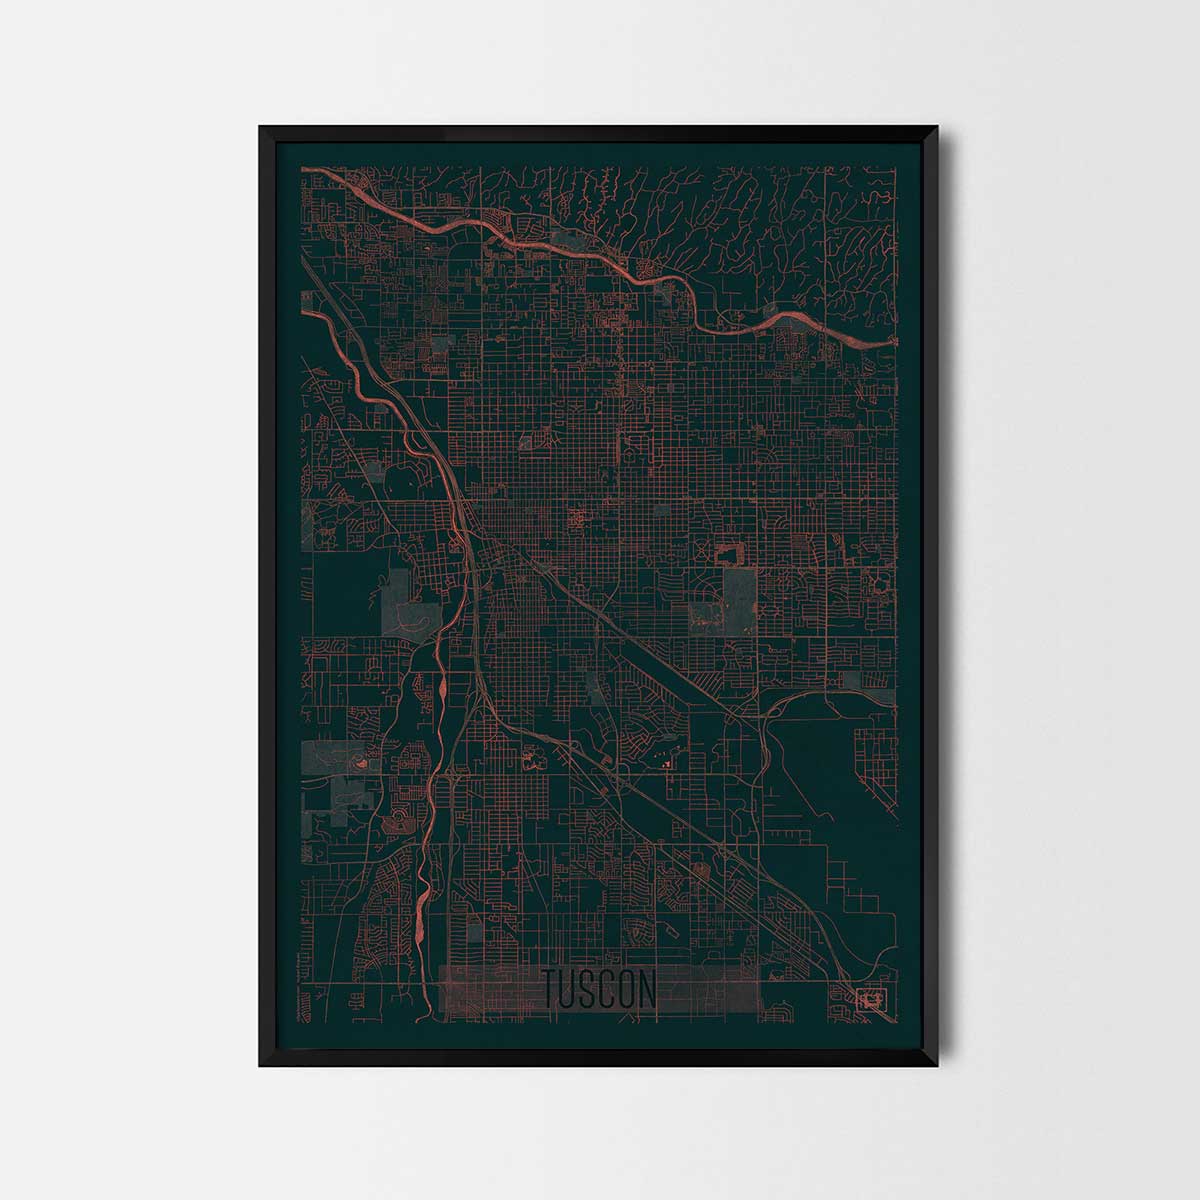 art maps of cities Tuscon city posters cool art posters city gift city map art posters map posters city map prints map art custom city maps